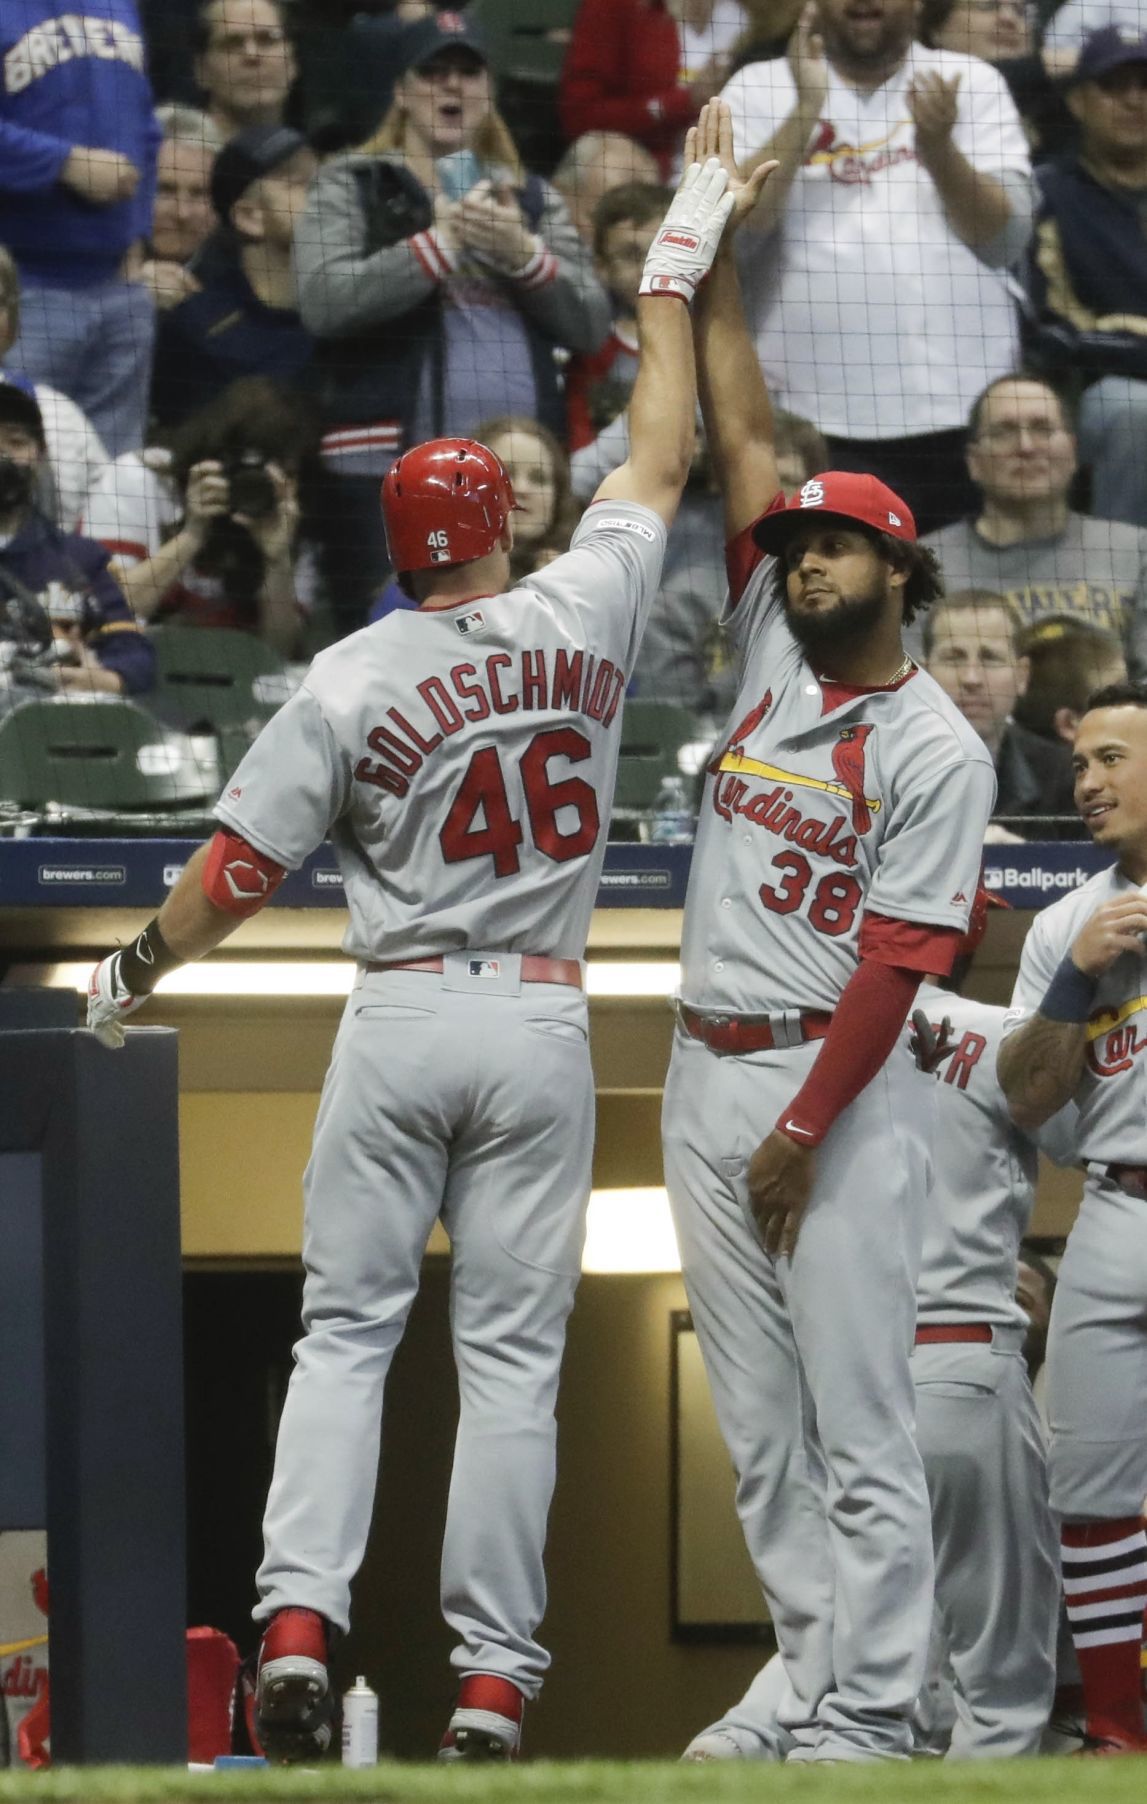 &#39;Comeback player of the day&#39;: After 3-K debut with Cards, Goldy belts 3 homers off Brewers | St ...